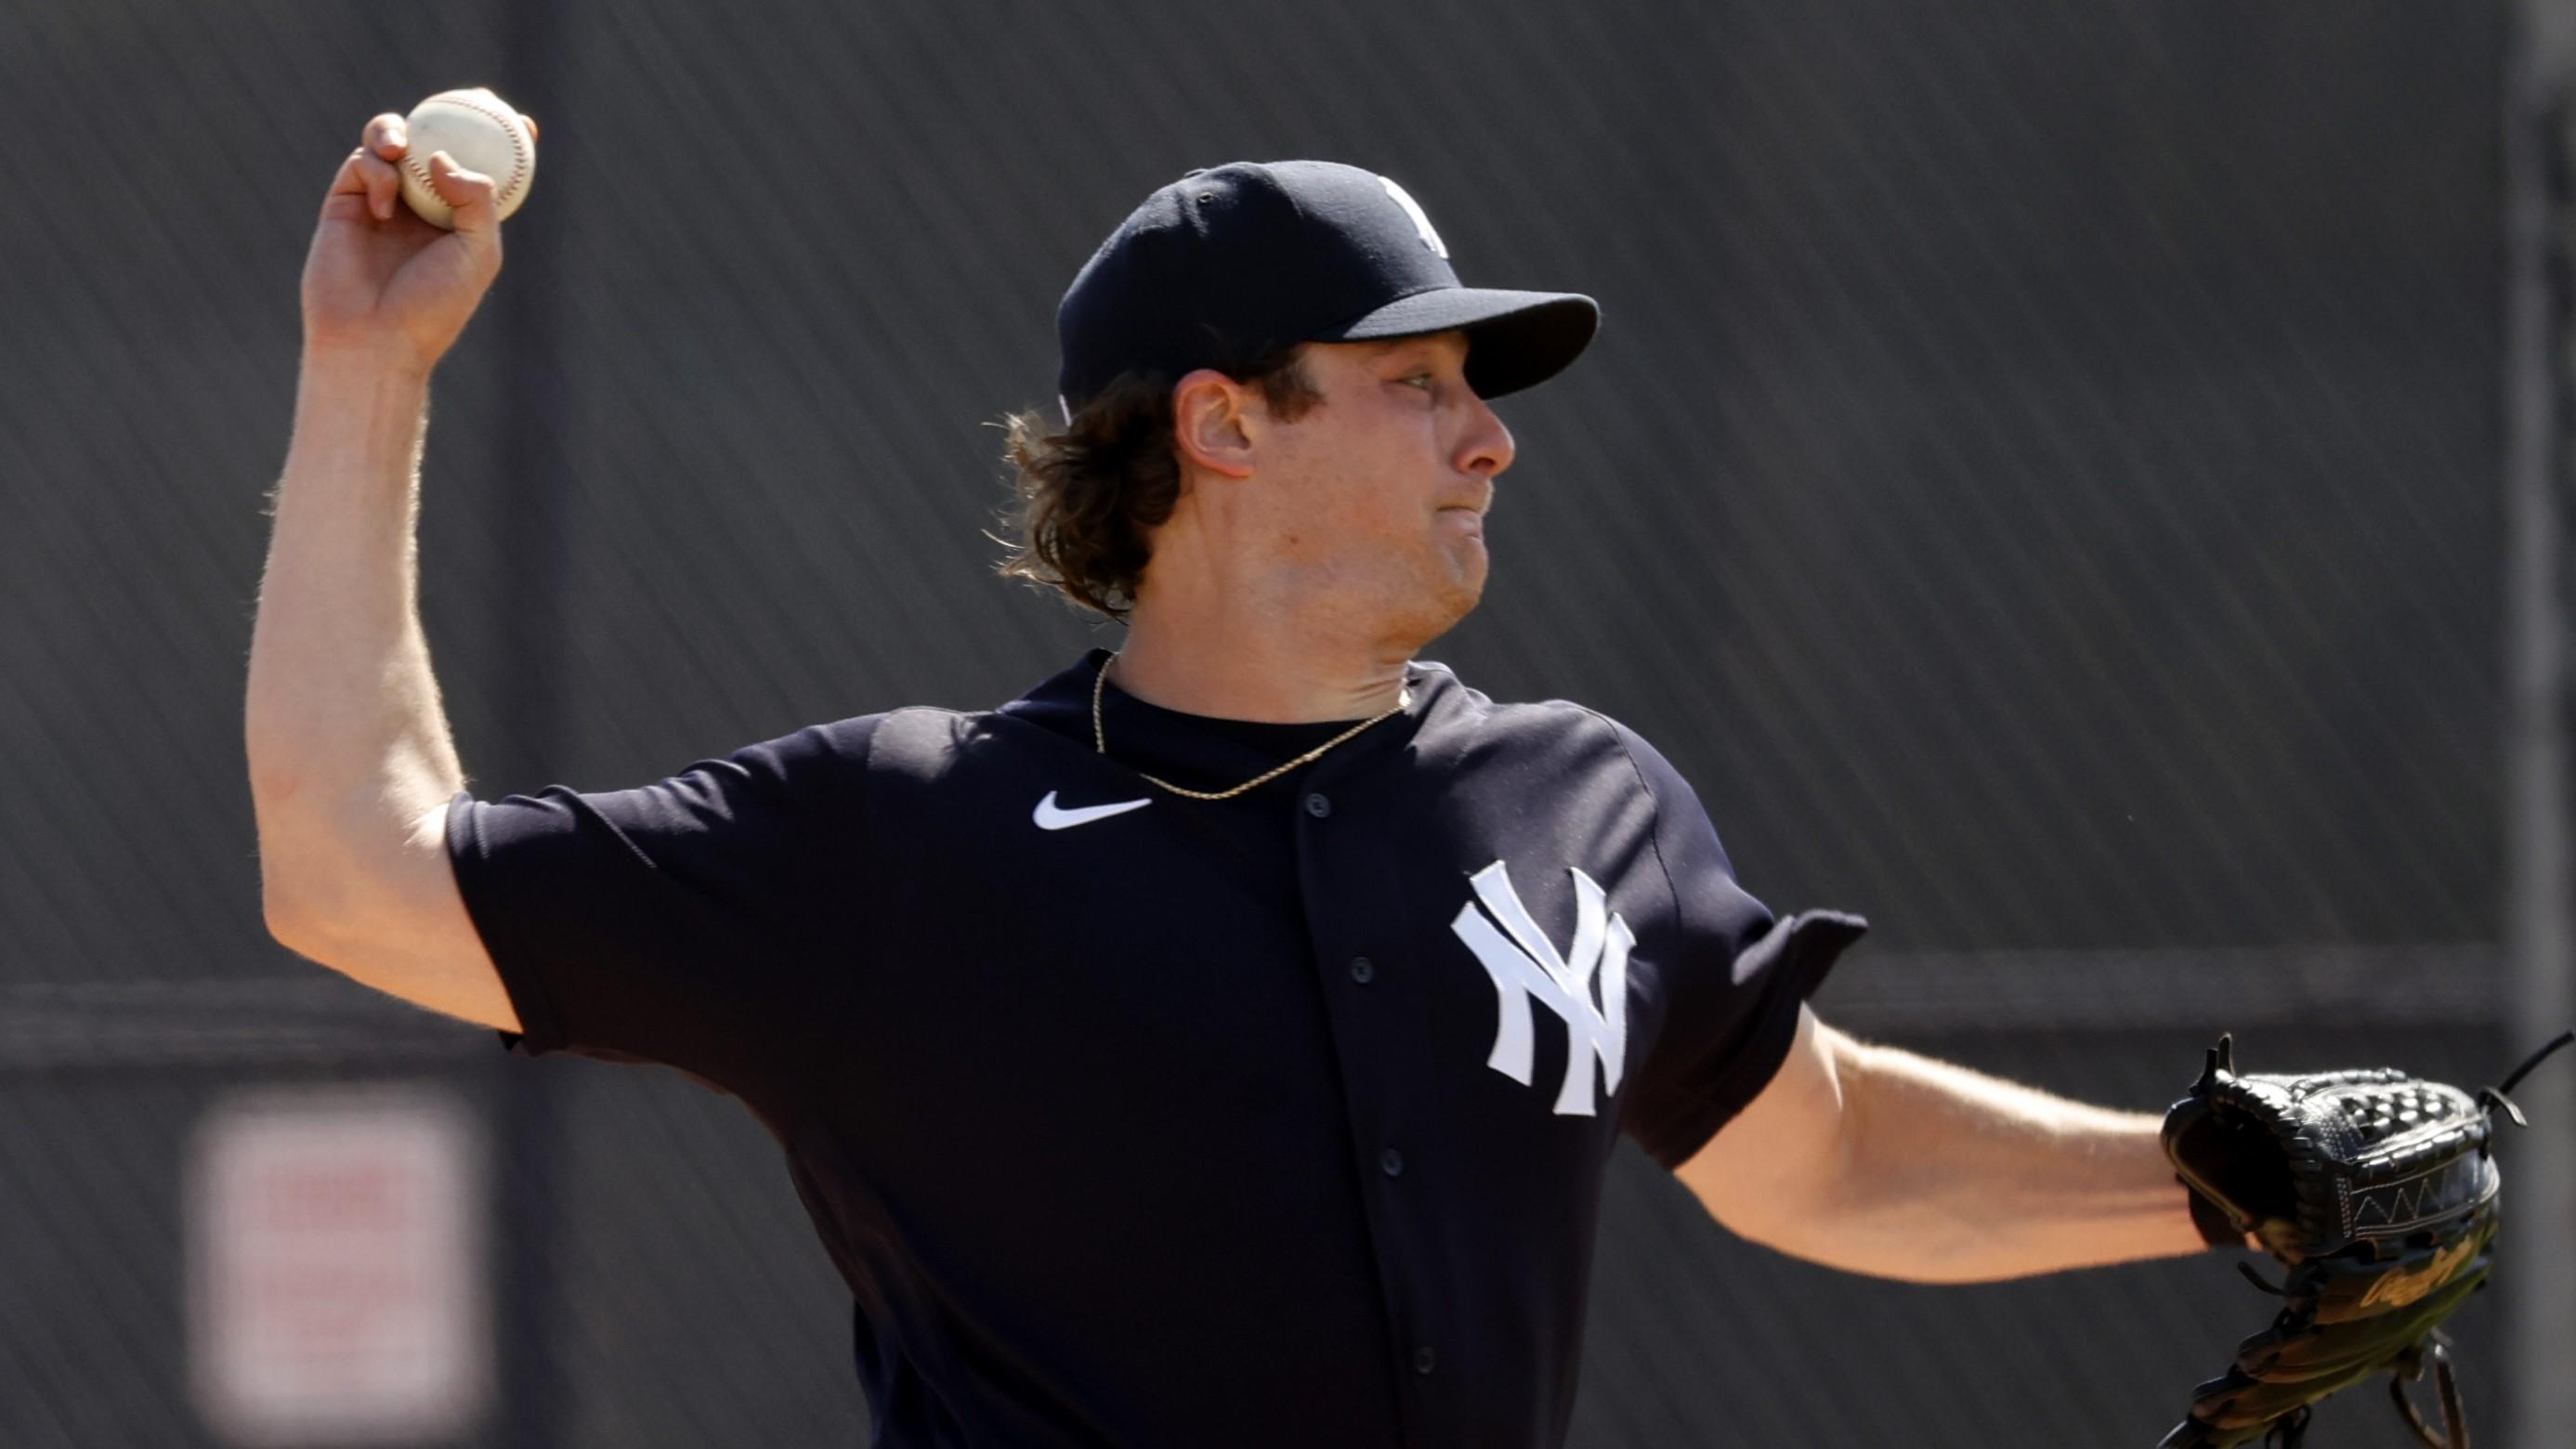 New York Yankees starting pitcher Gerrit Cole (45) throws a pitch during live batting practice during spring training at the Yankees player development complex. / Kim Klement